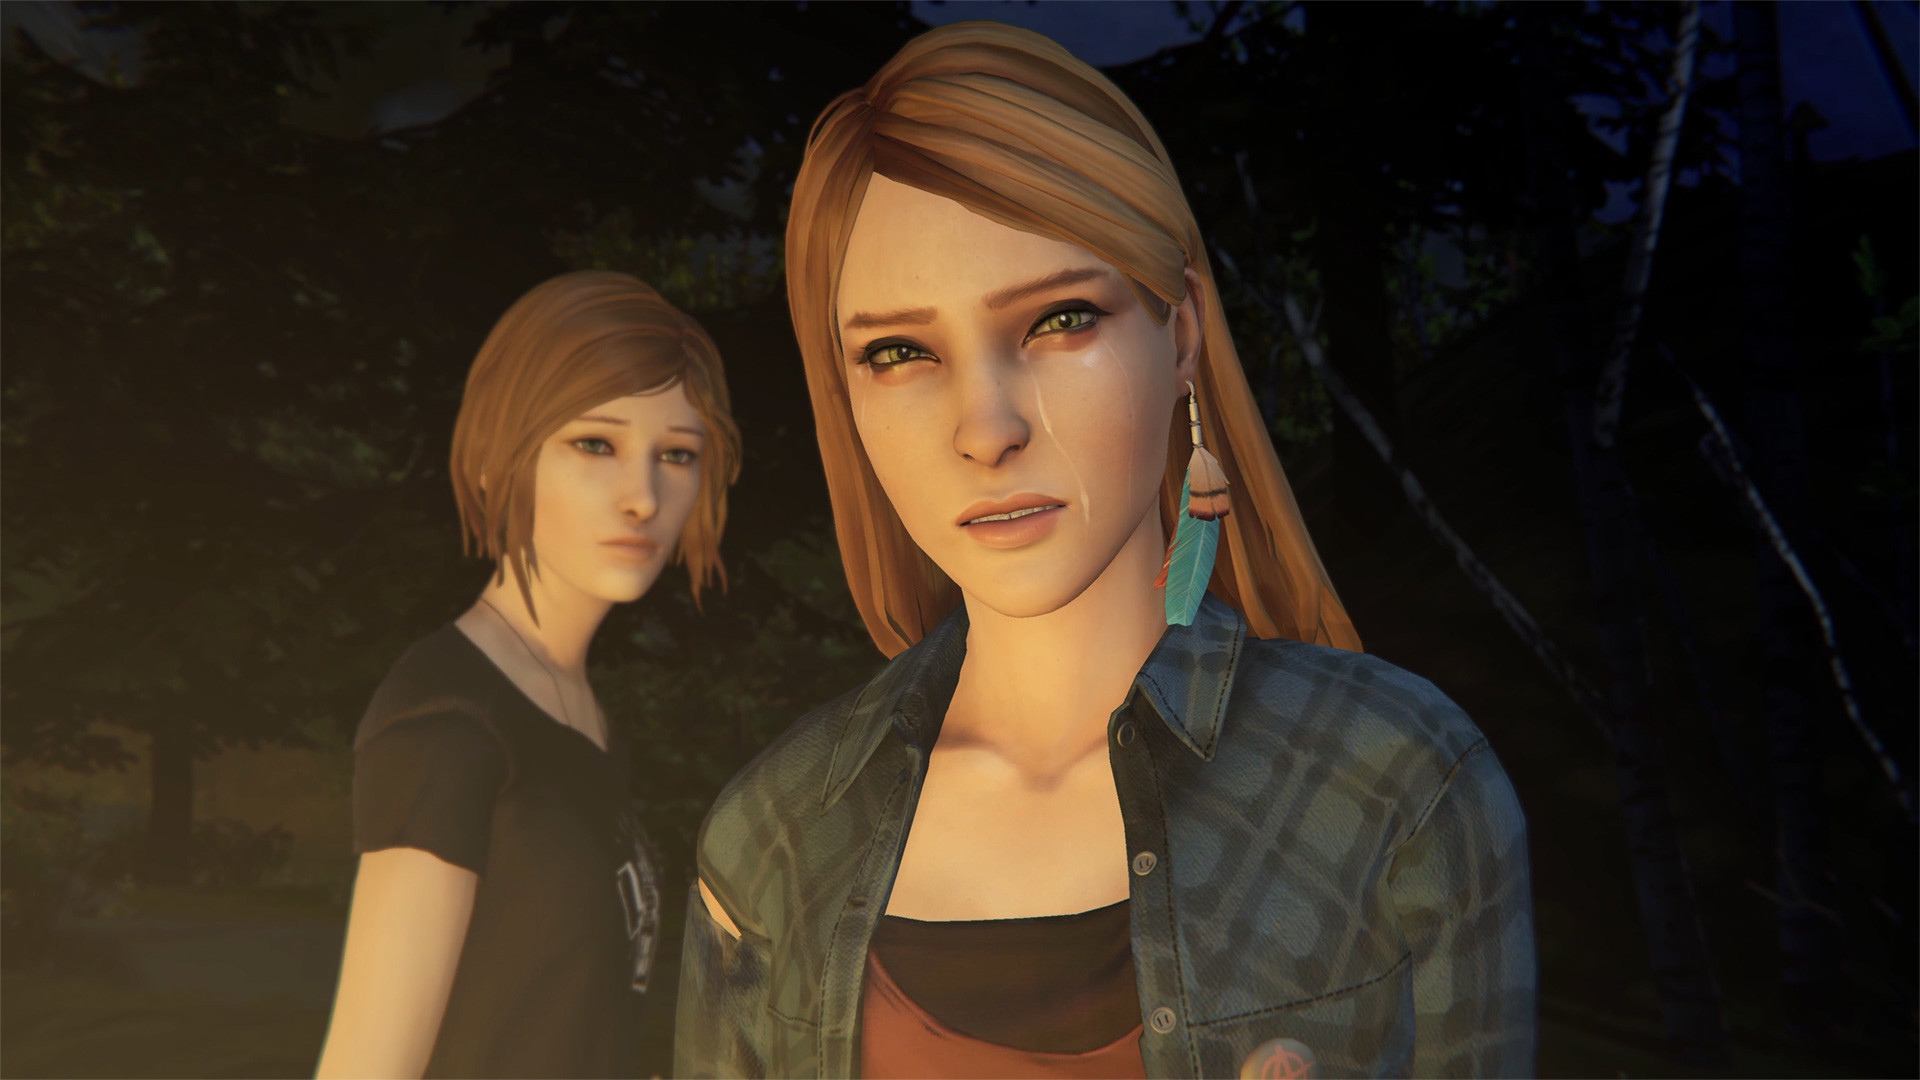 Life is Strange Remastered Collection - Metacritic